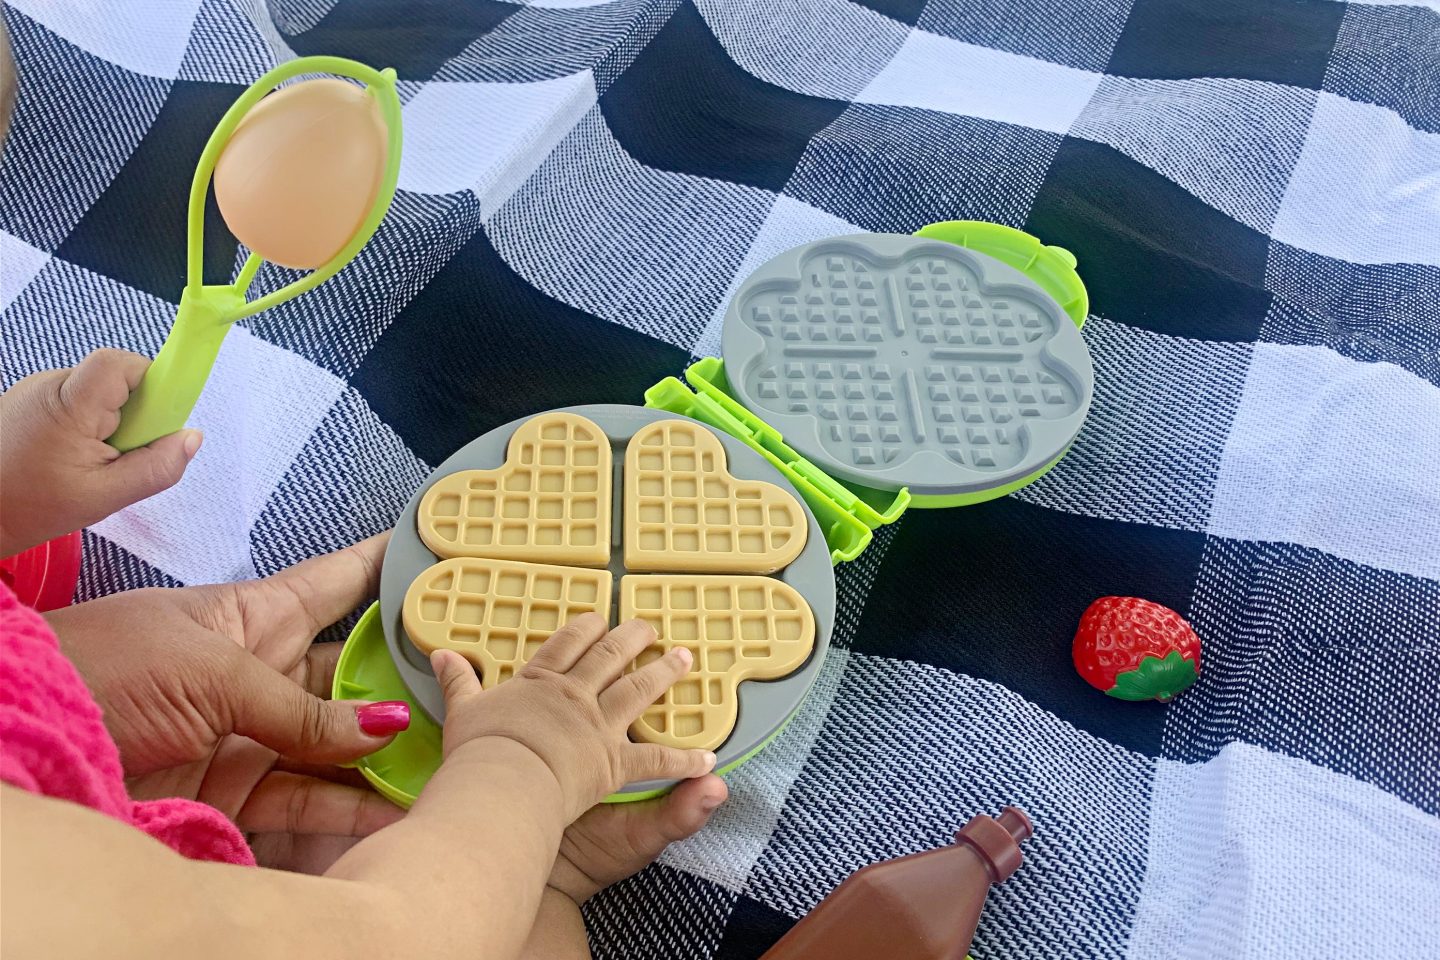 https://justbrennonblog.com/wp-content/uploads/2023/06/National-Waffle-Iron-Day-Playset-10-1440x960.jpg